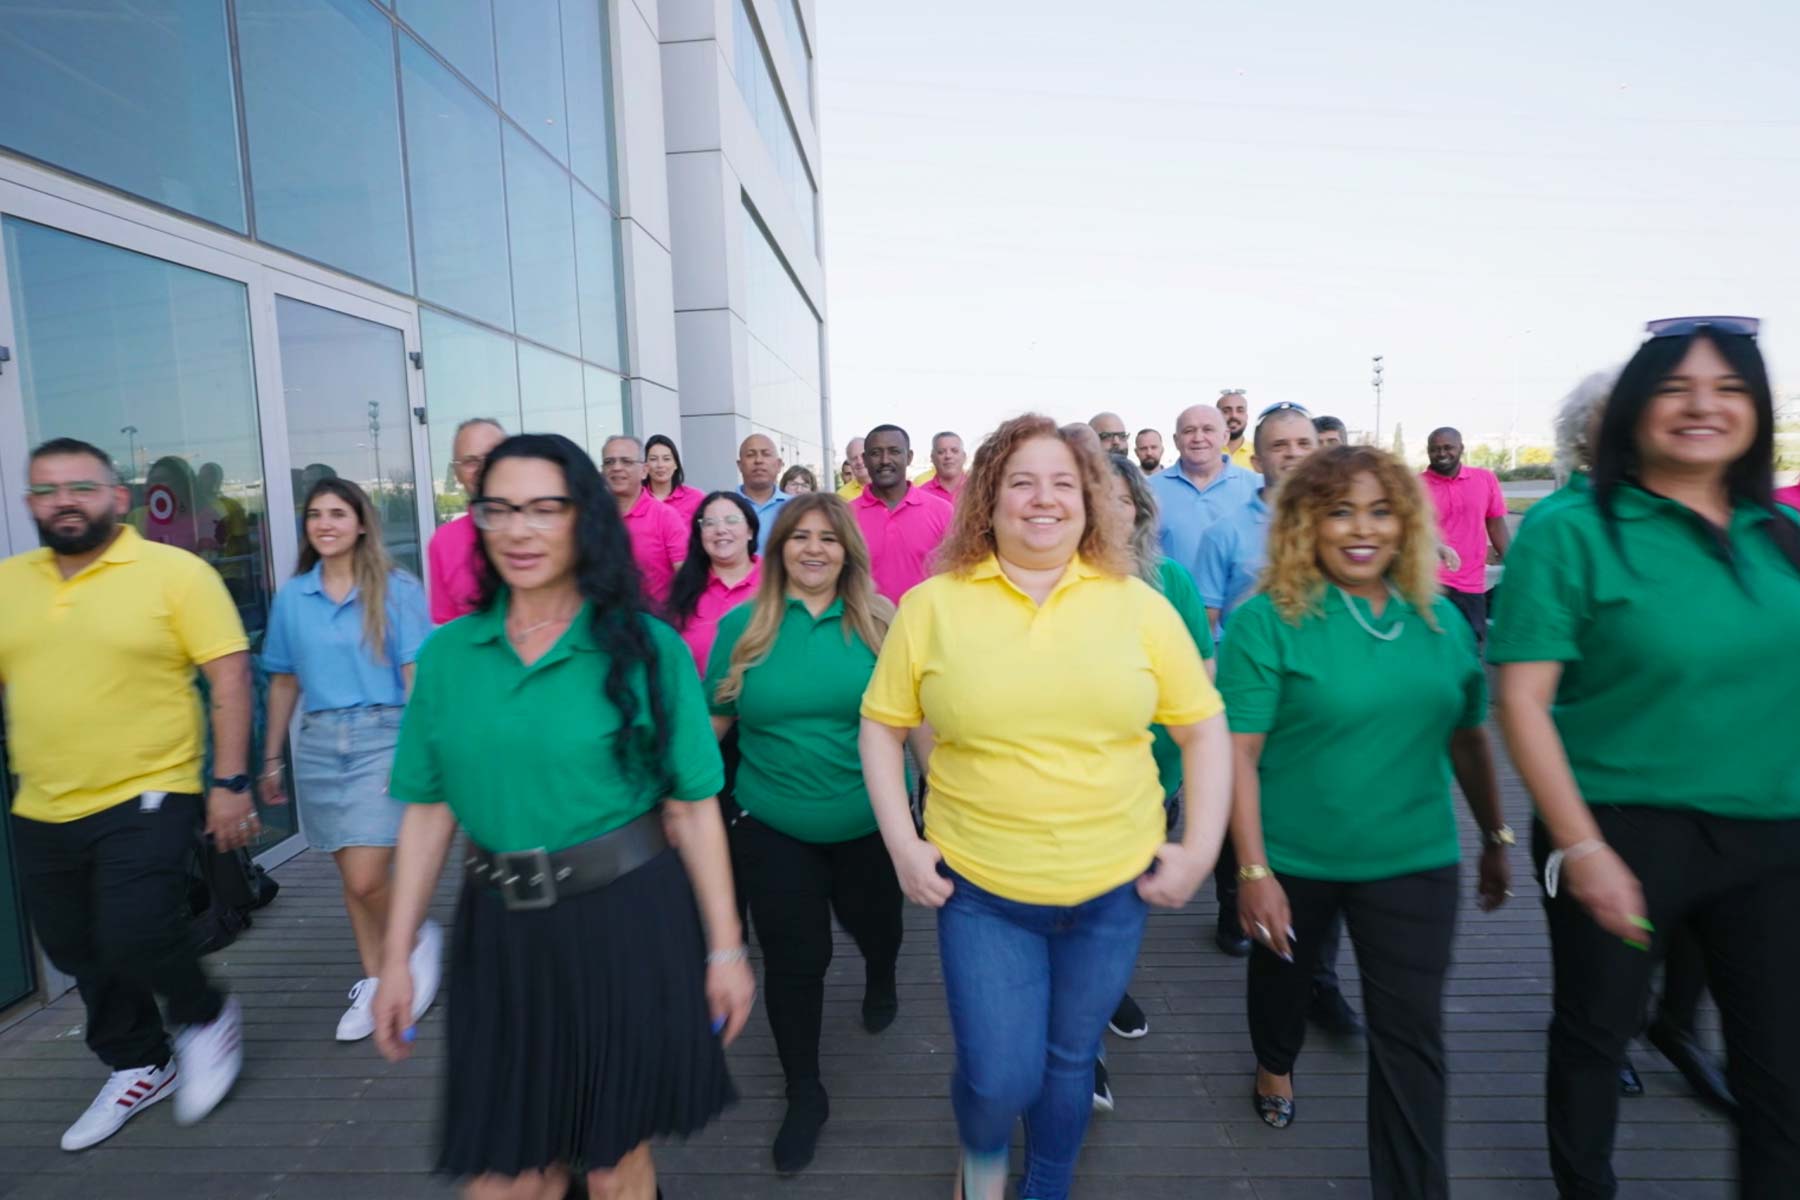 Electra FM employees smiling walking together